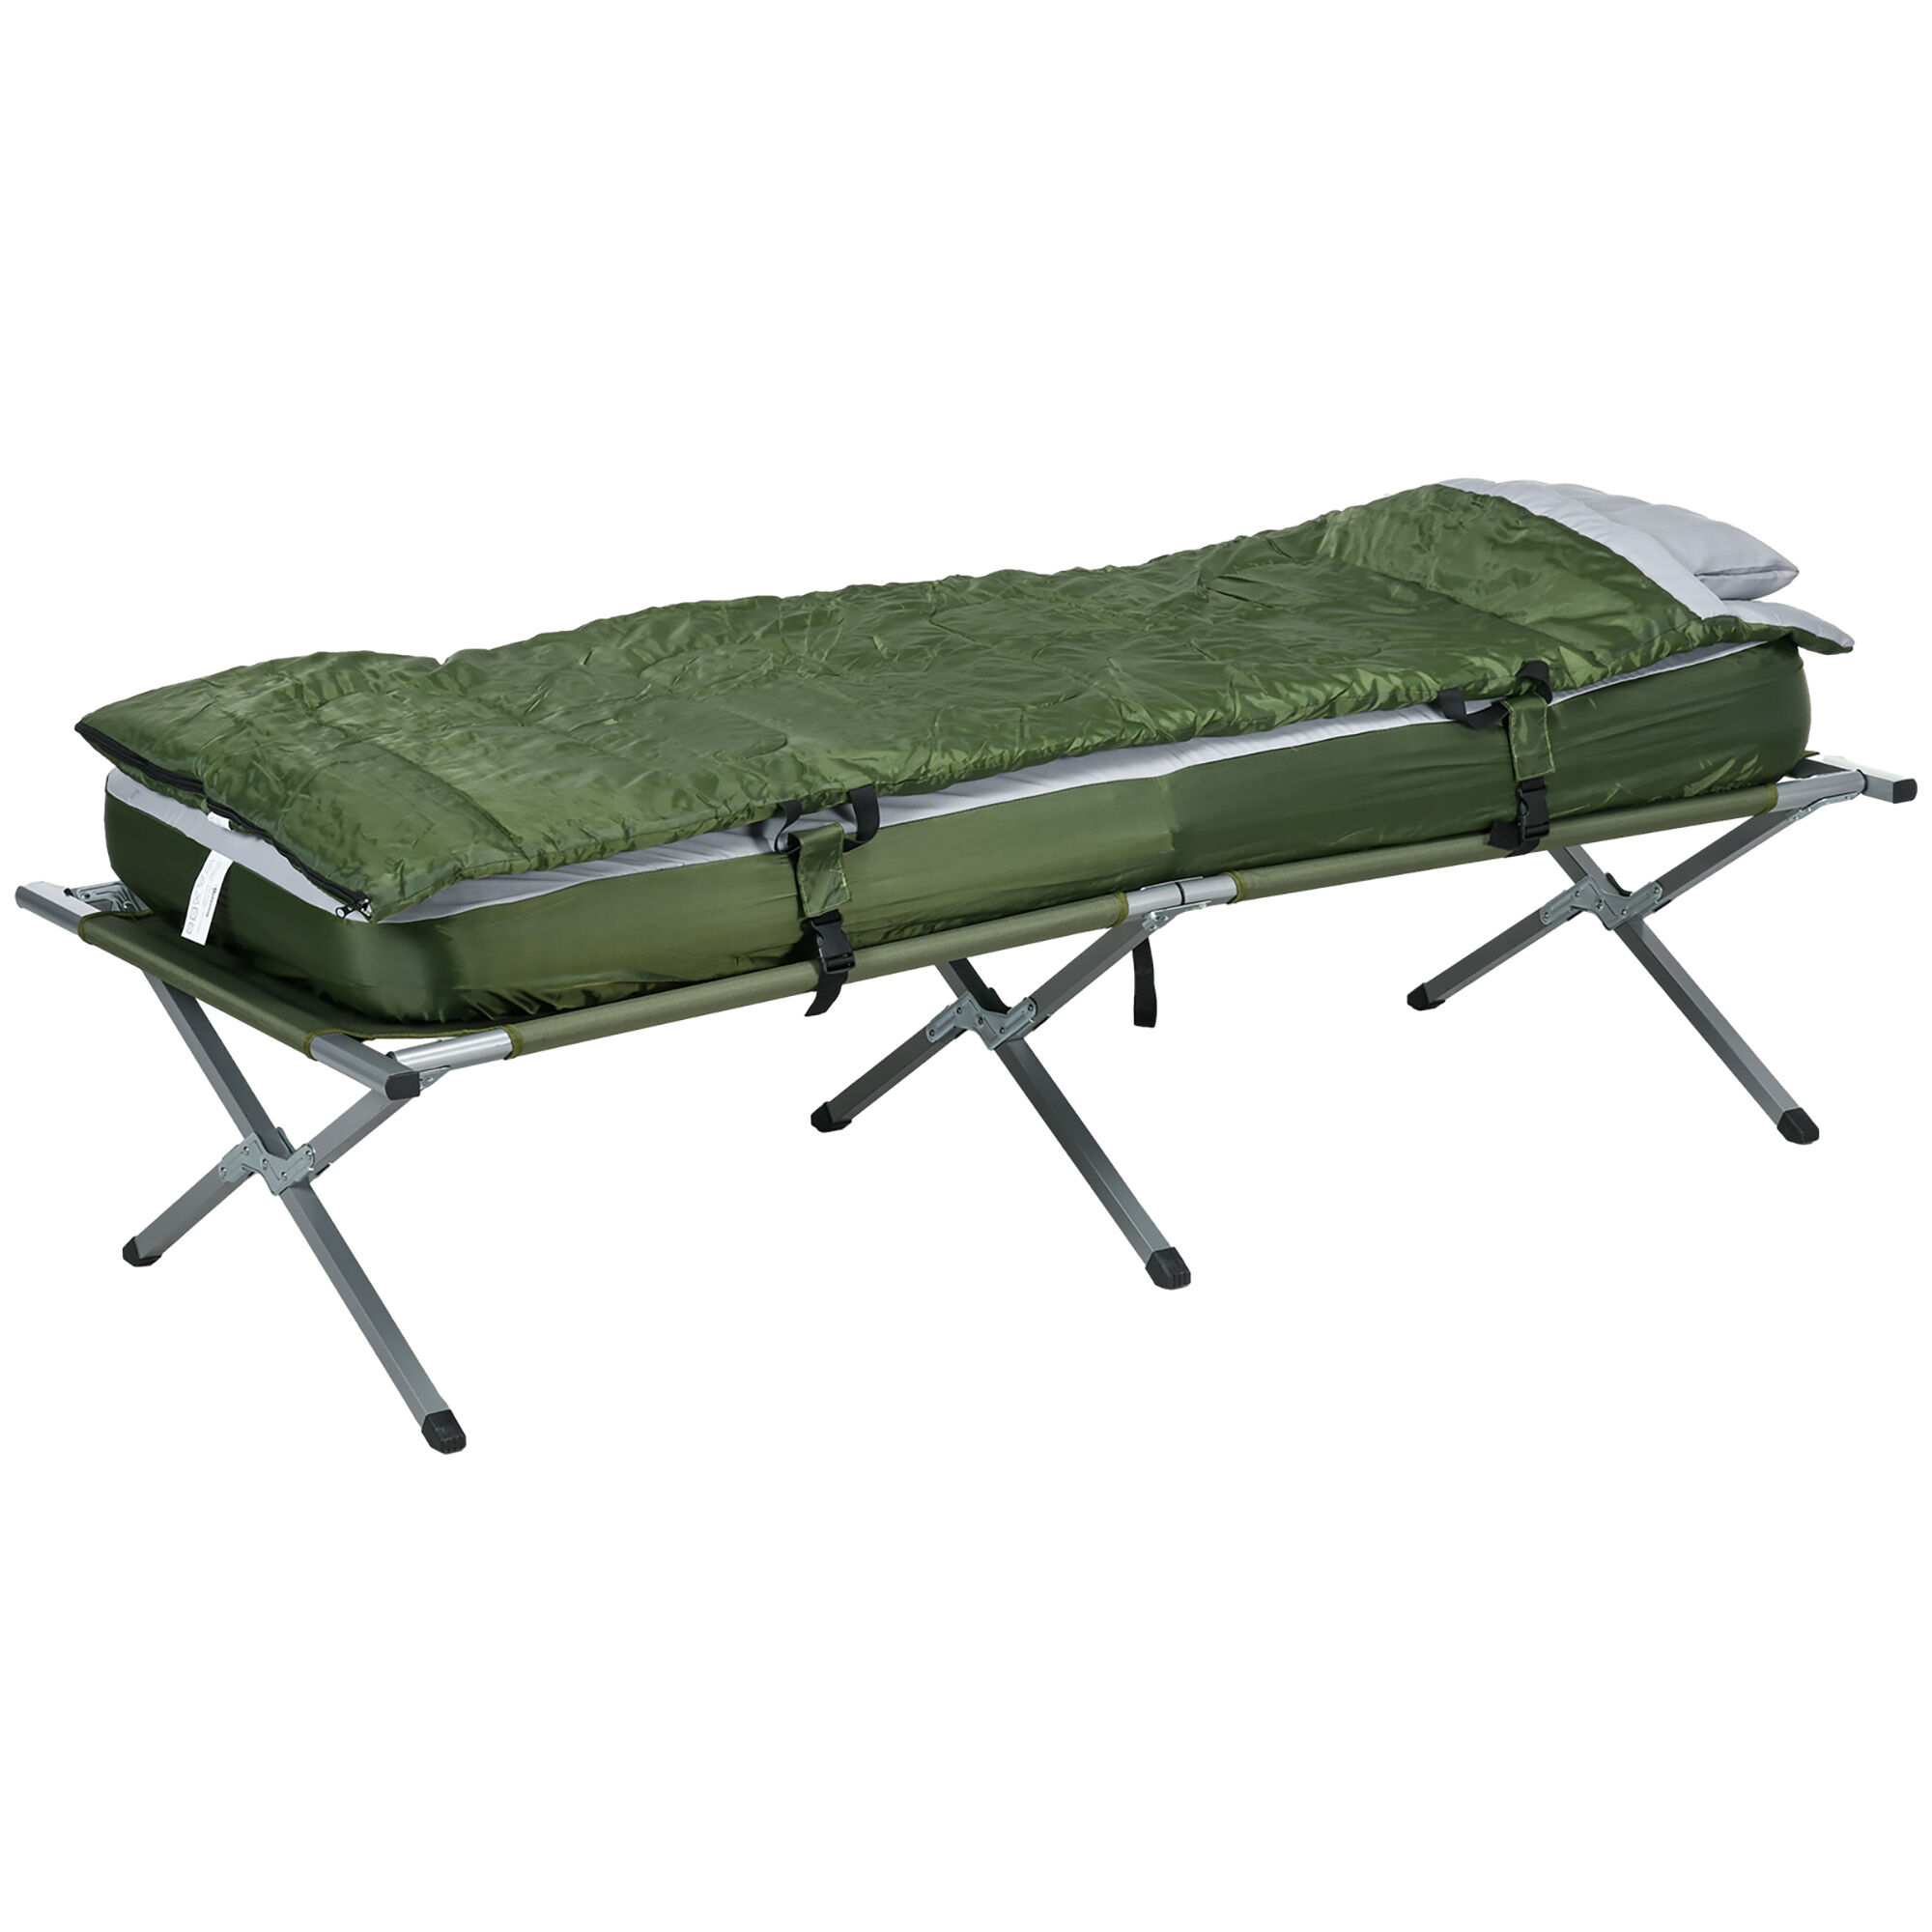 Outsunny Portable Folding Camping Cot Set with Mattress Sleeping Bag Pillow for Travel Camp Beach Comfortable Carry Bag Included   Aosom.com